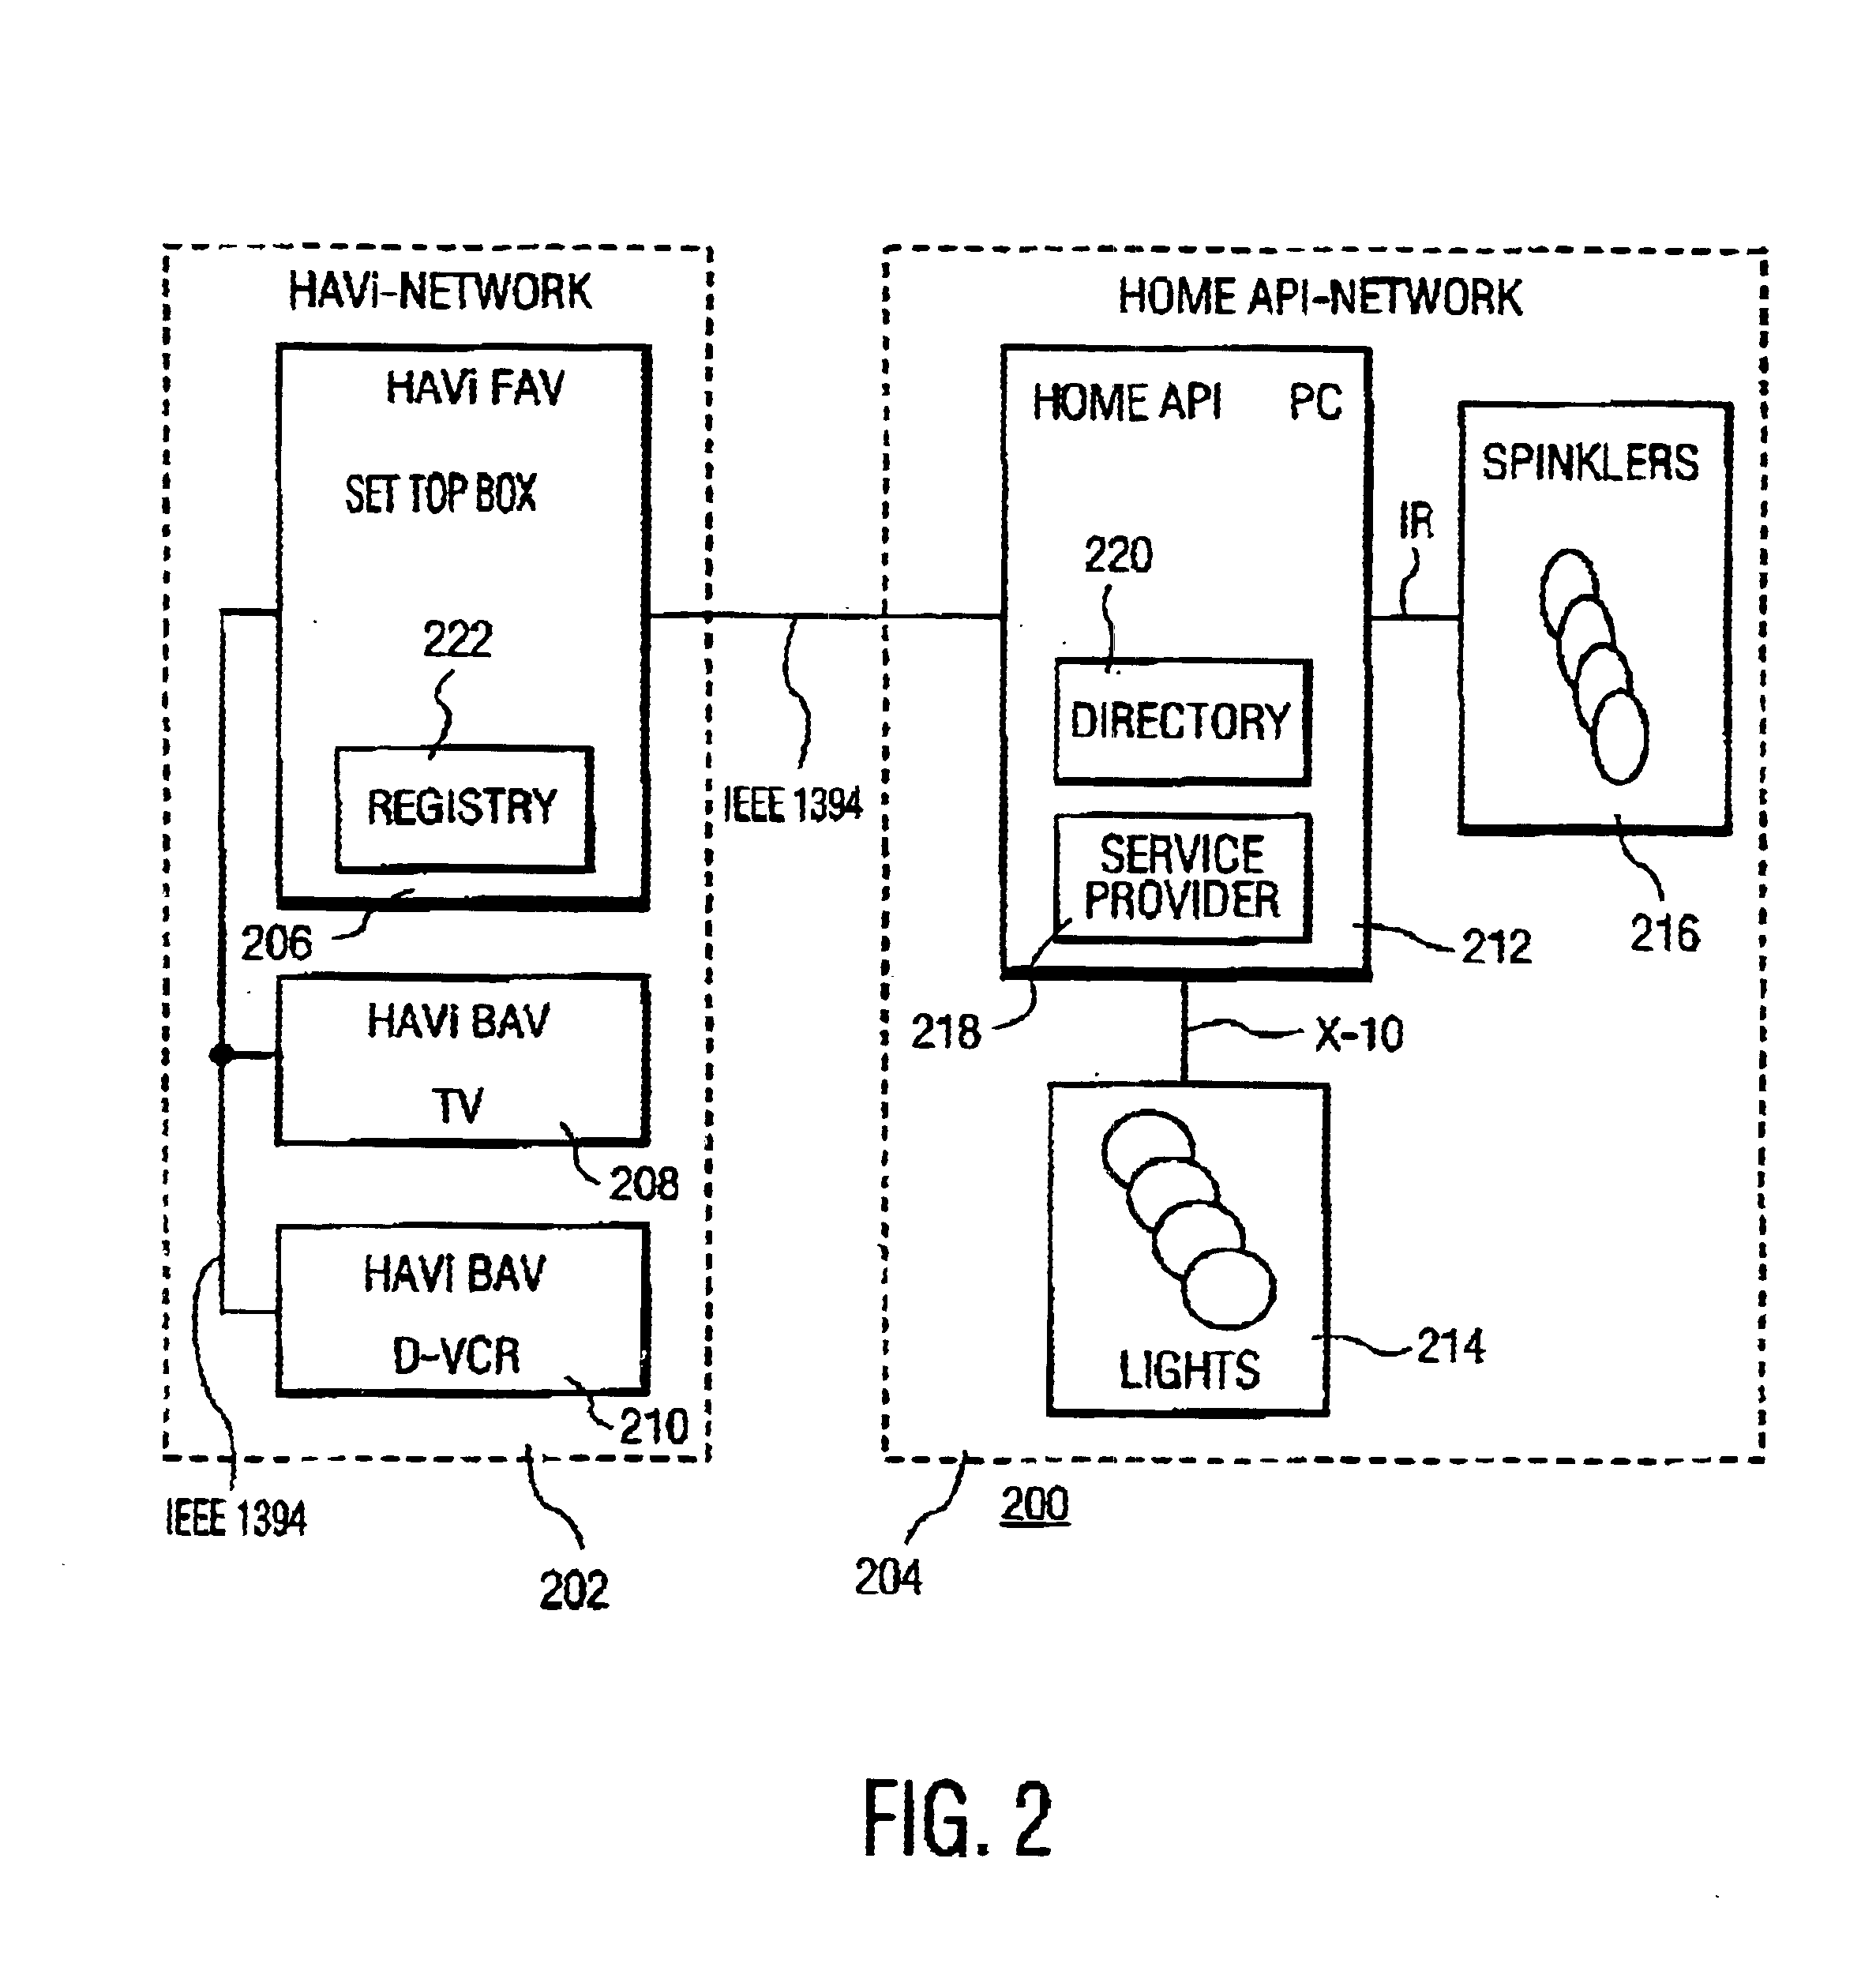 Method for enabling interaction between two home networks of different software architectures